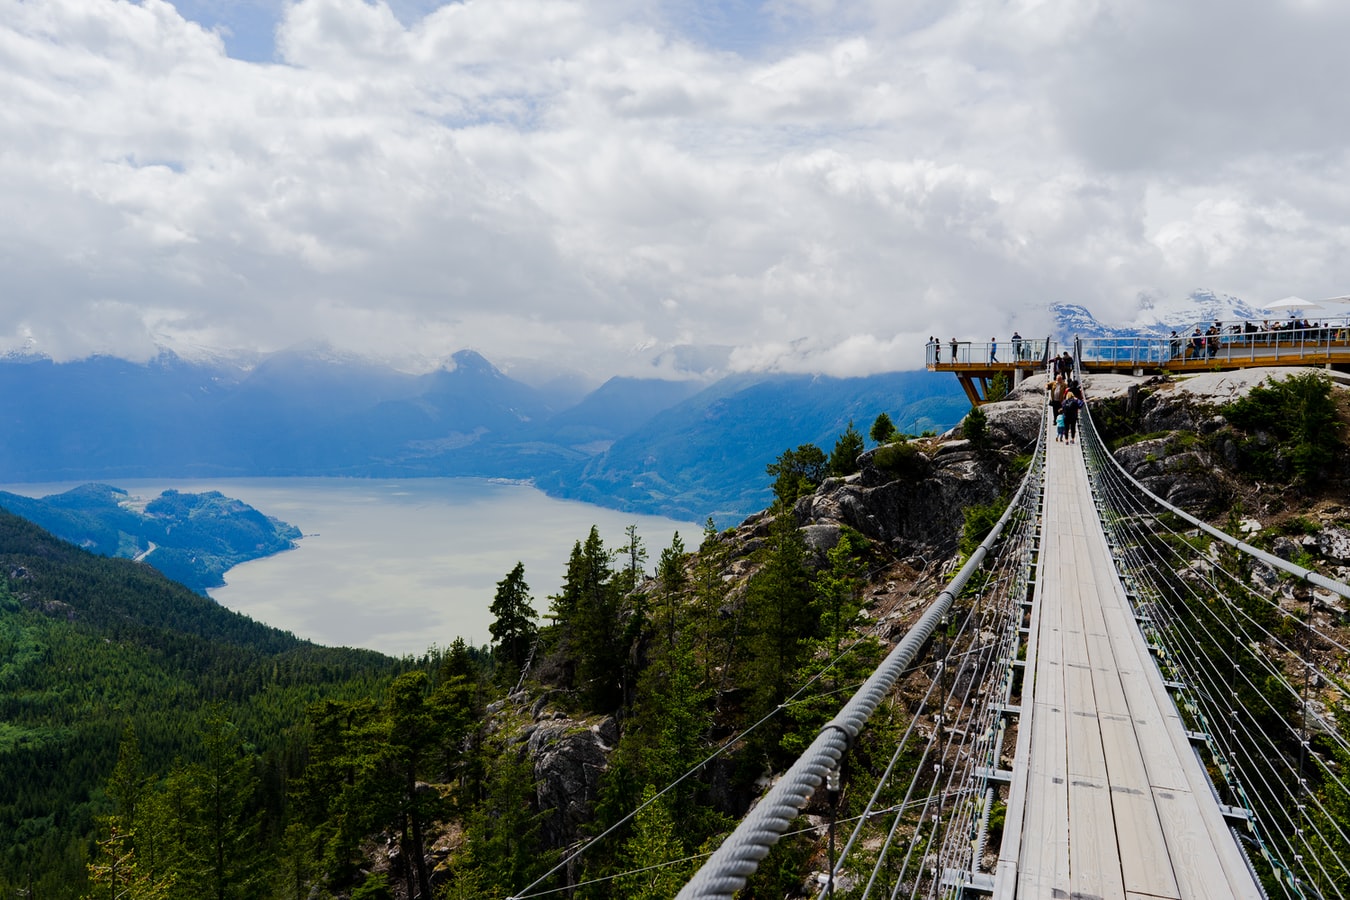 Suspension bridge overlooking mountains and a lake